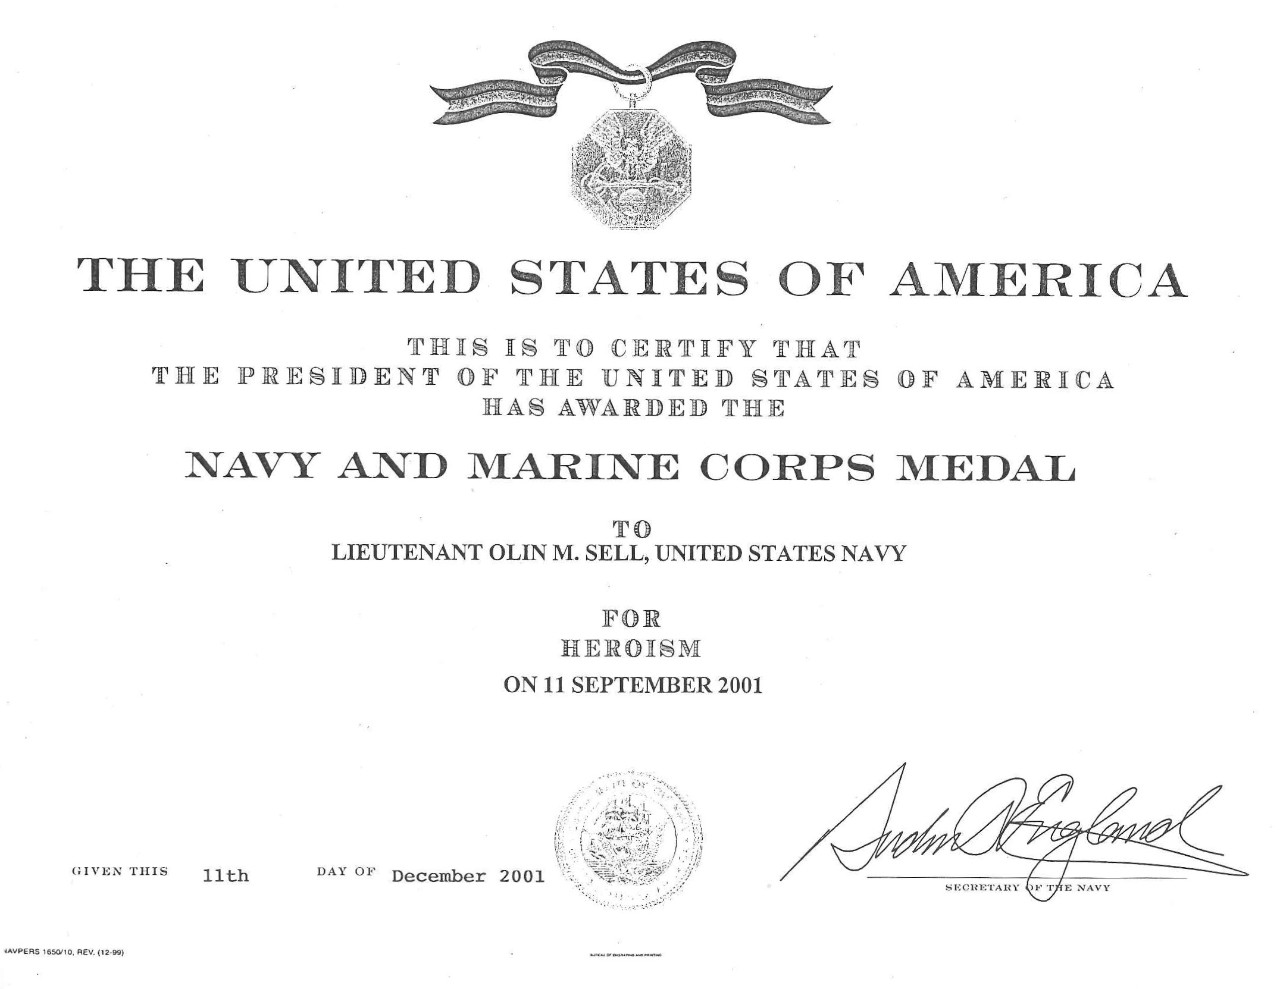 Sell, Olin LT Navy and Marine Corps Medal